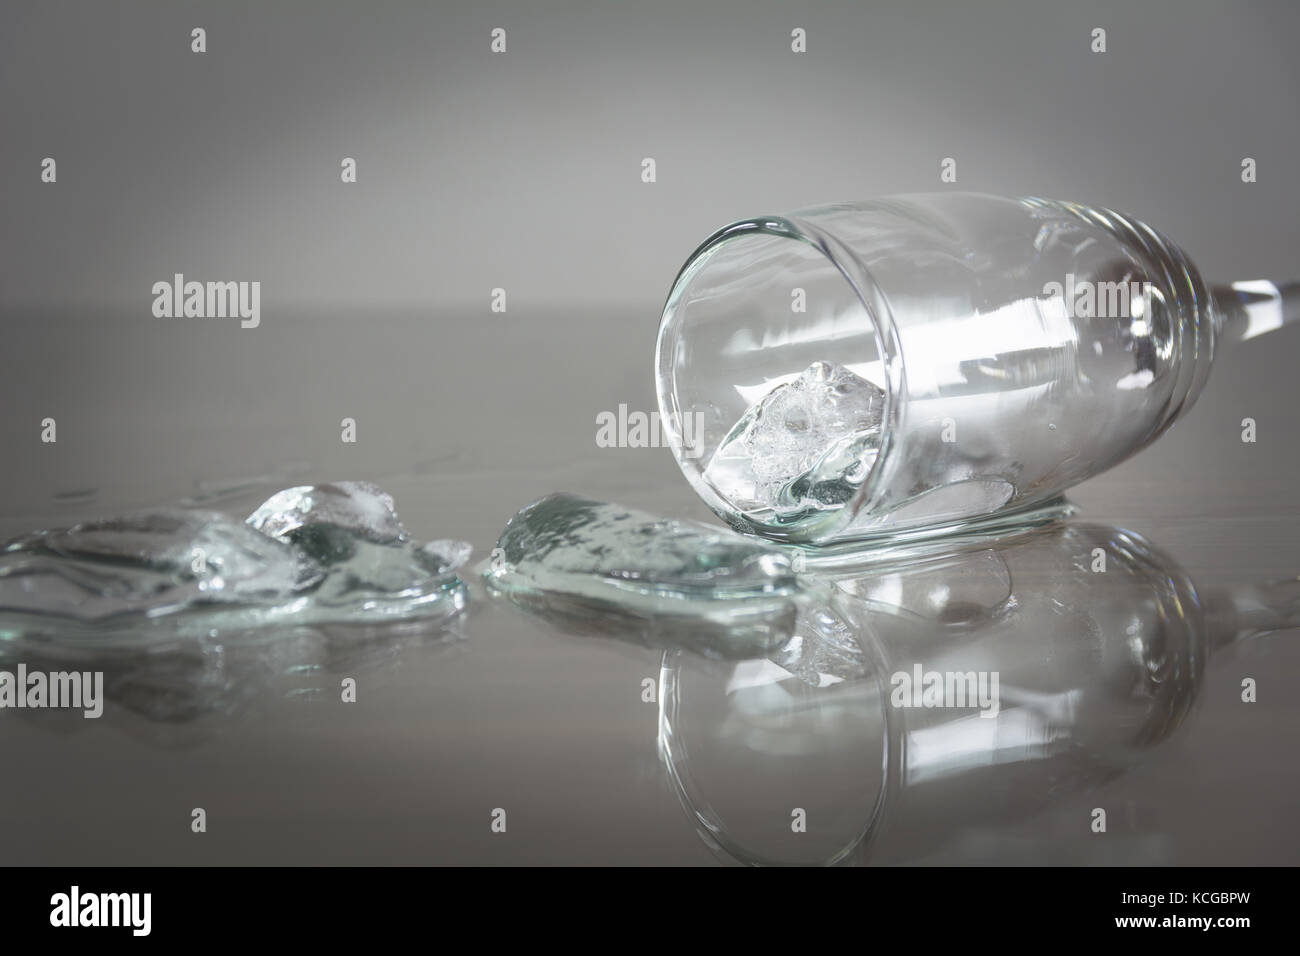 Spilled water with ice cubes on table. Glass with spilled water and ice cube. Stock Photo